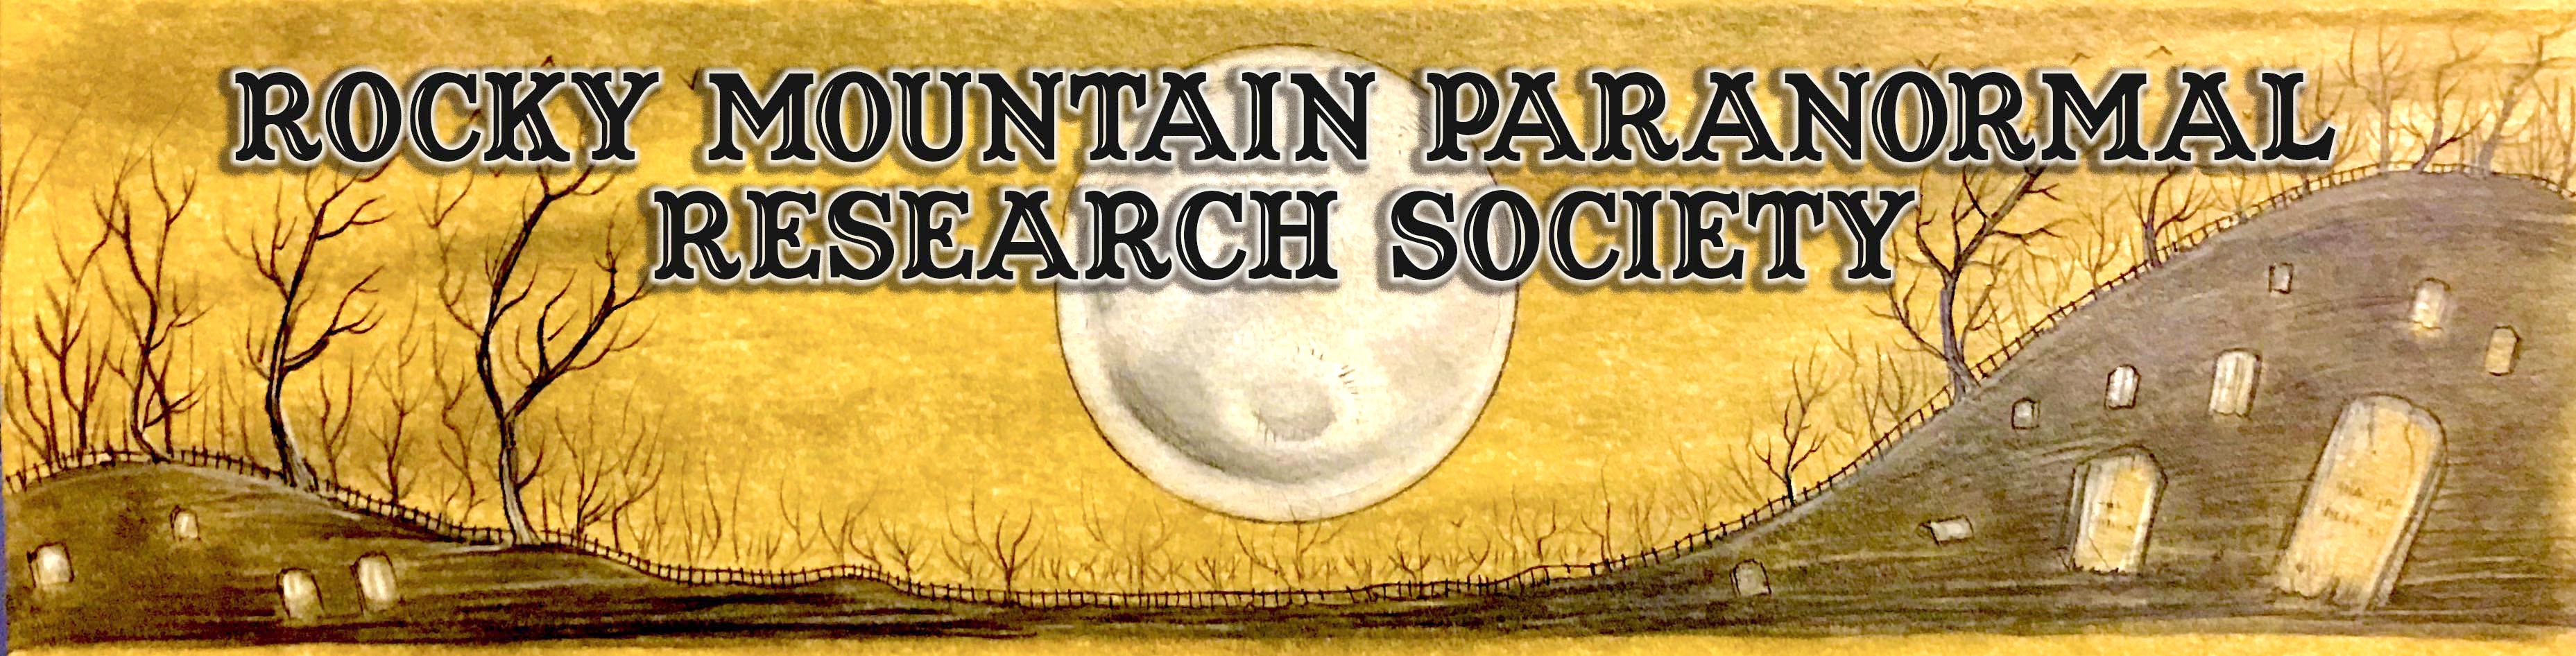 Welcome to the Rocky Mountain
        Paranormal Research Society